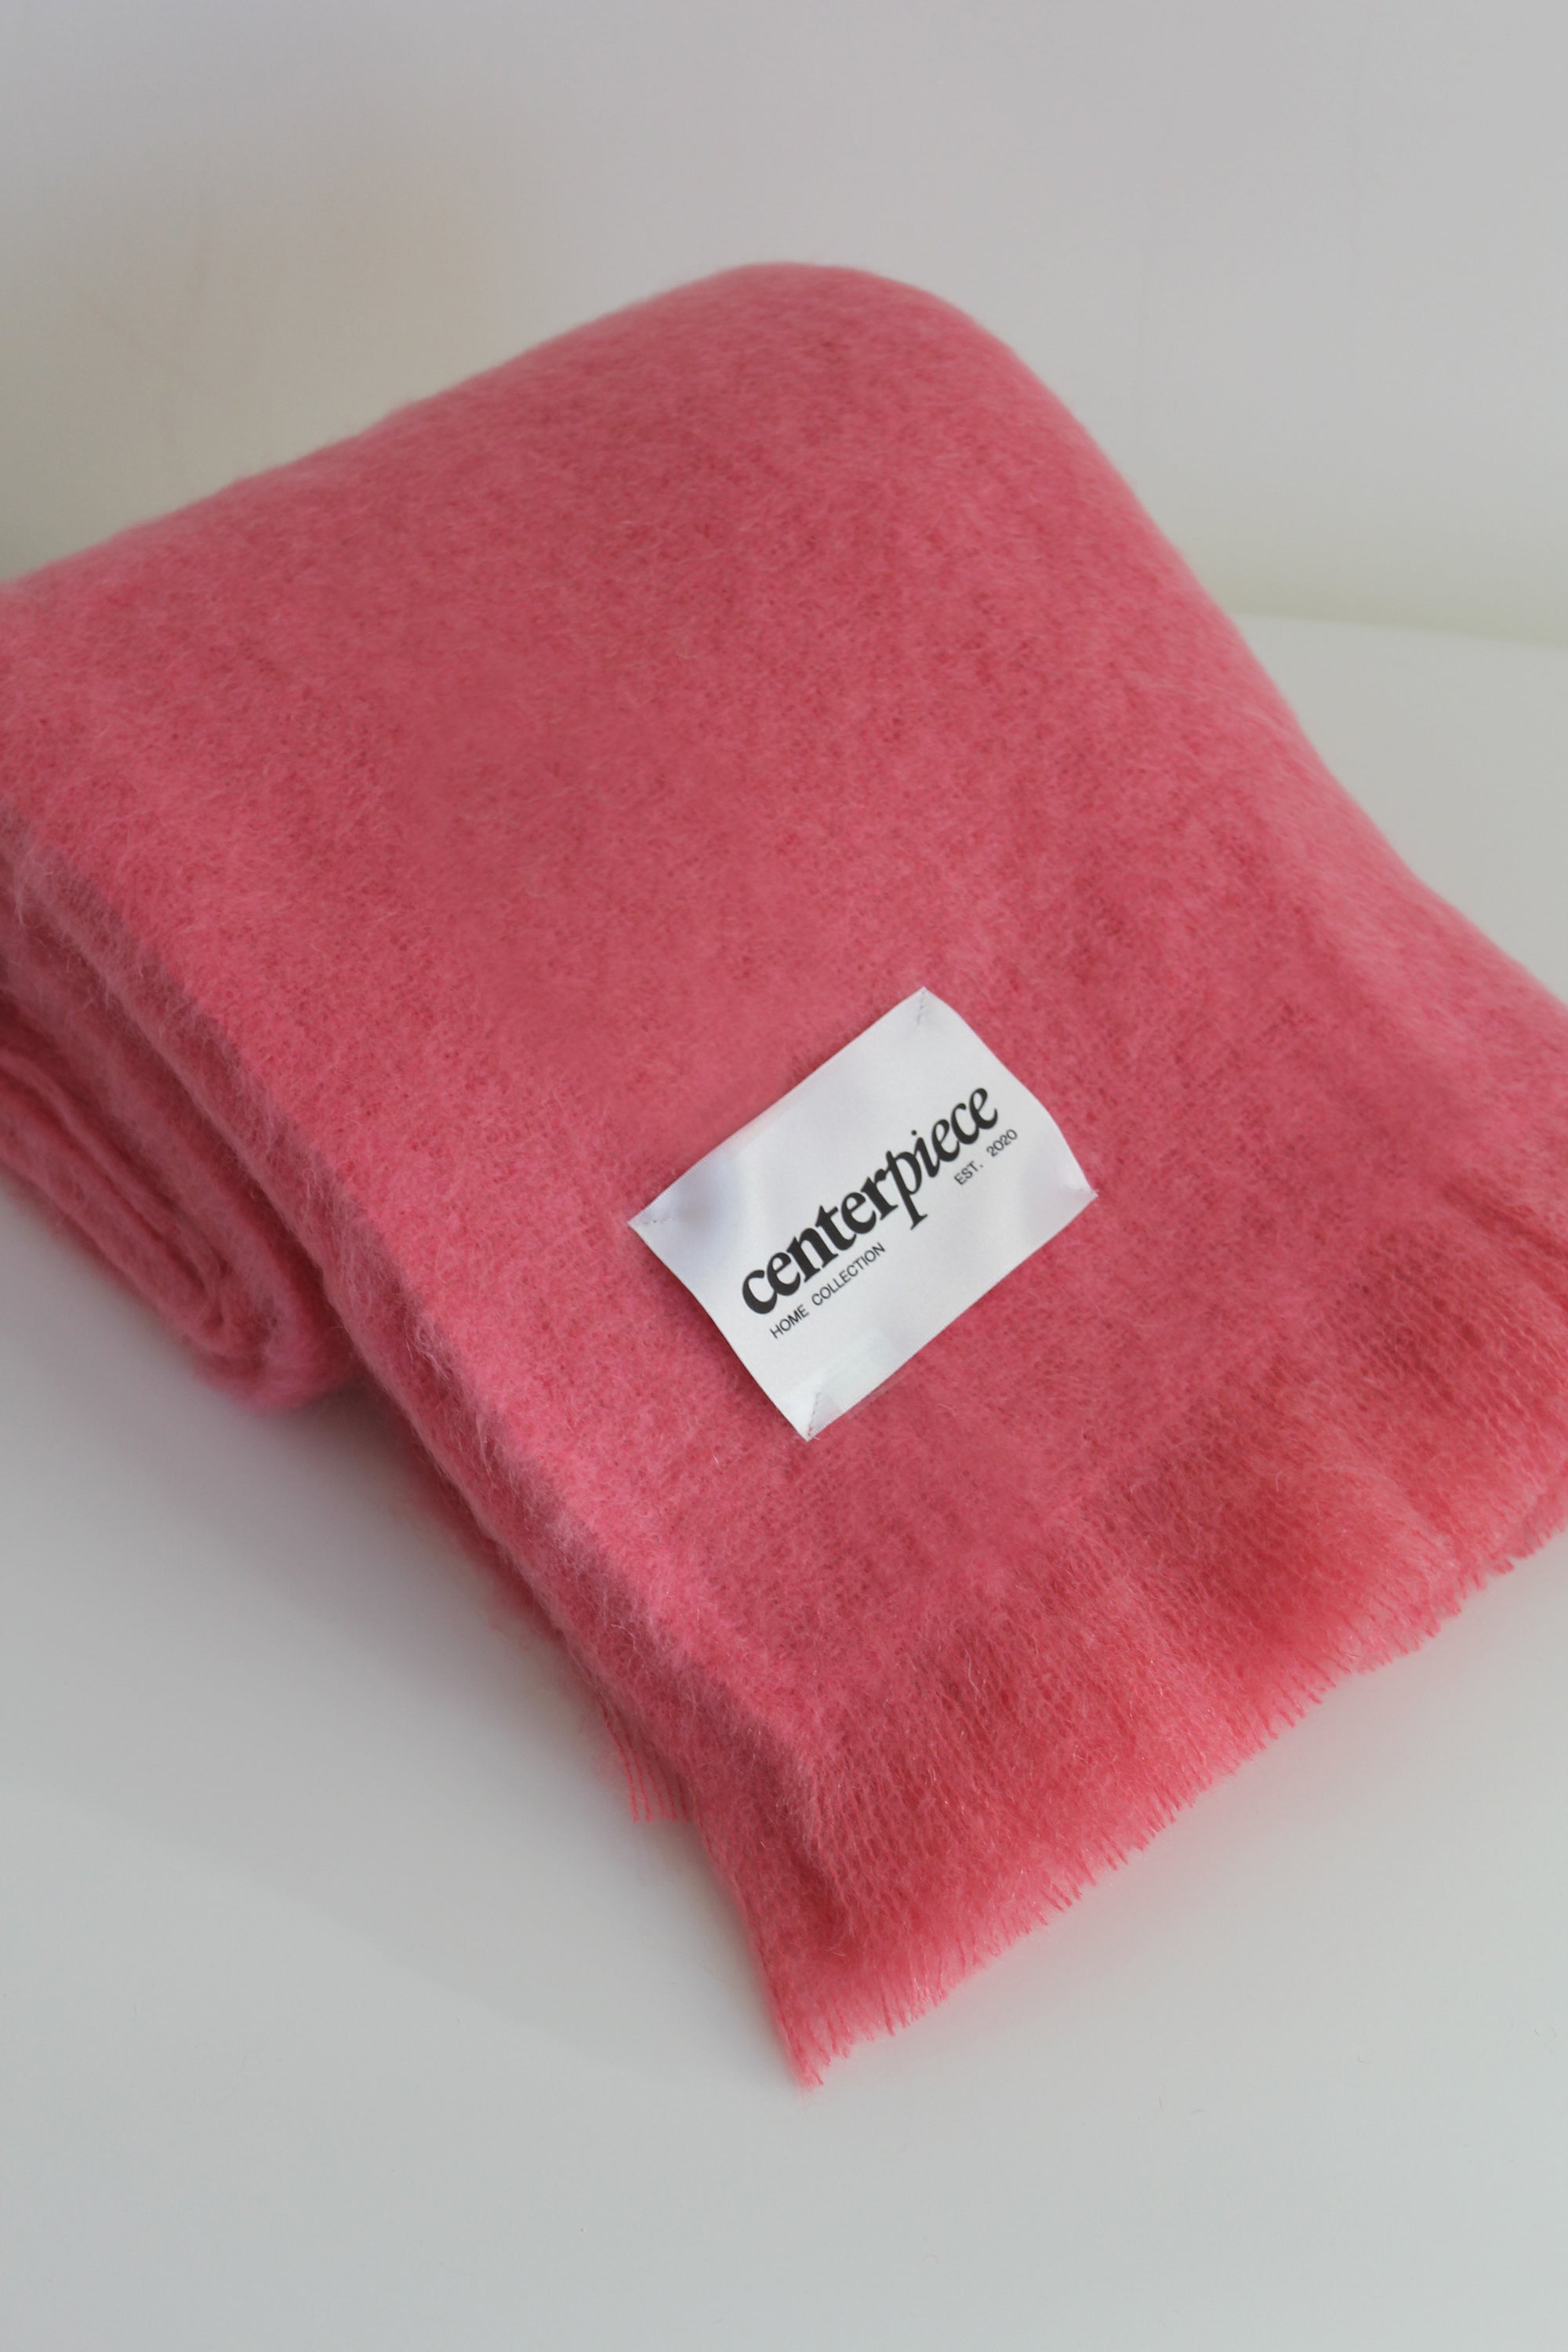 Pink Mohair Throw by Le Centerpiece